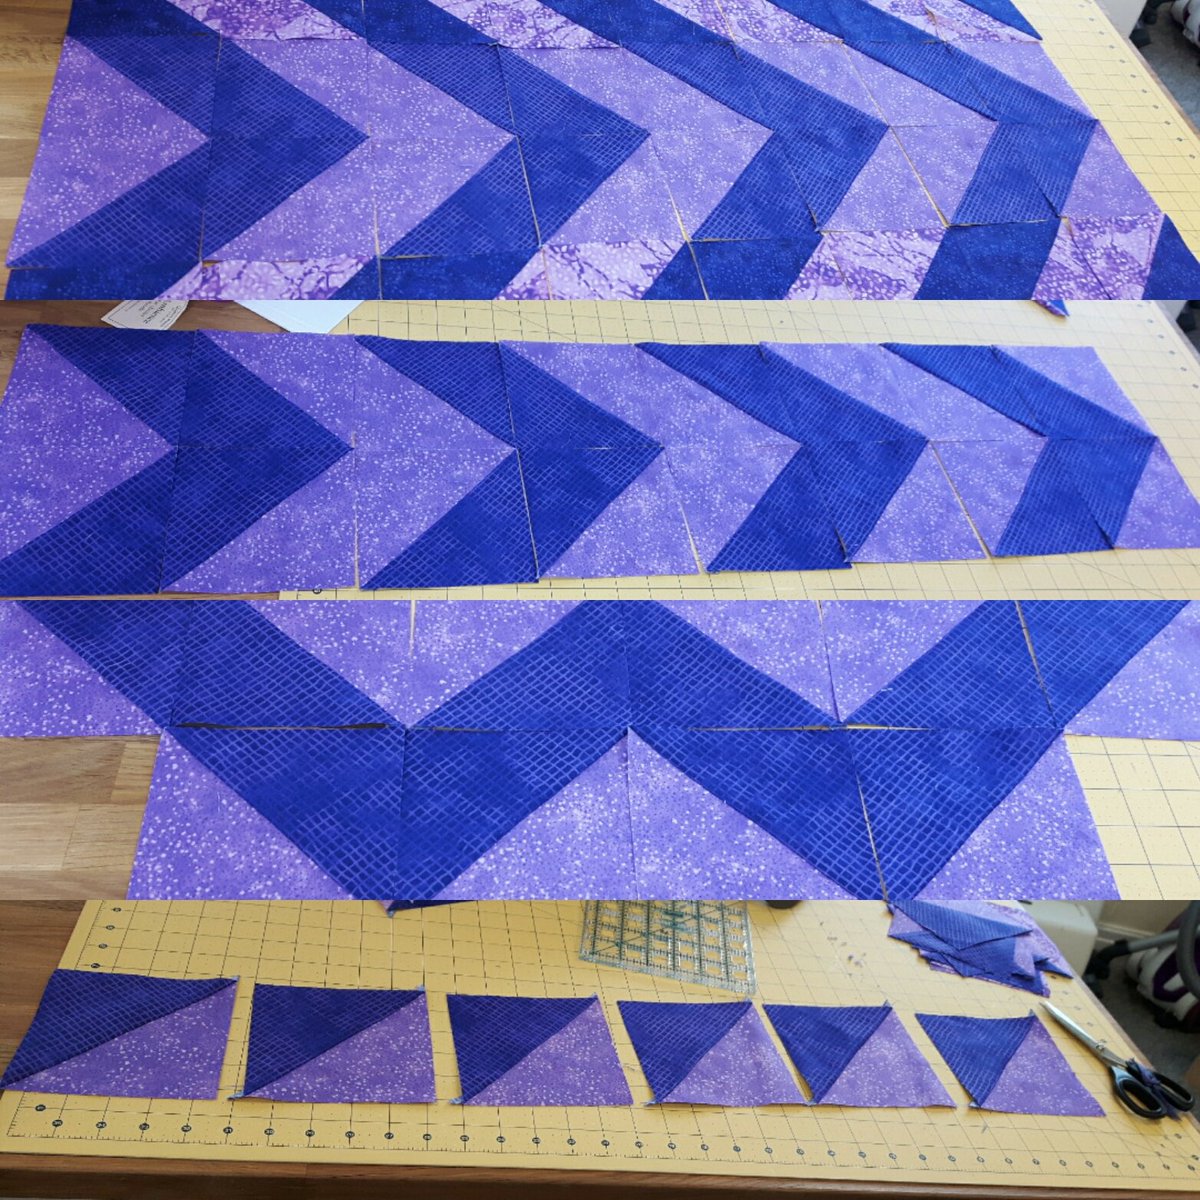 Playing with #halfsquaretriangles is brill.  #endlesspossibilities #patchwork #newtonlewillows #cheshire #lancashire